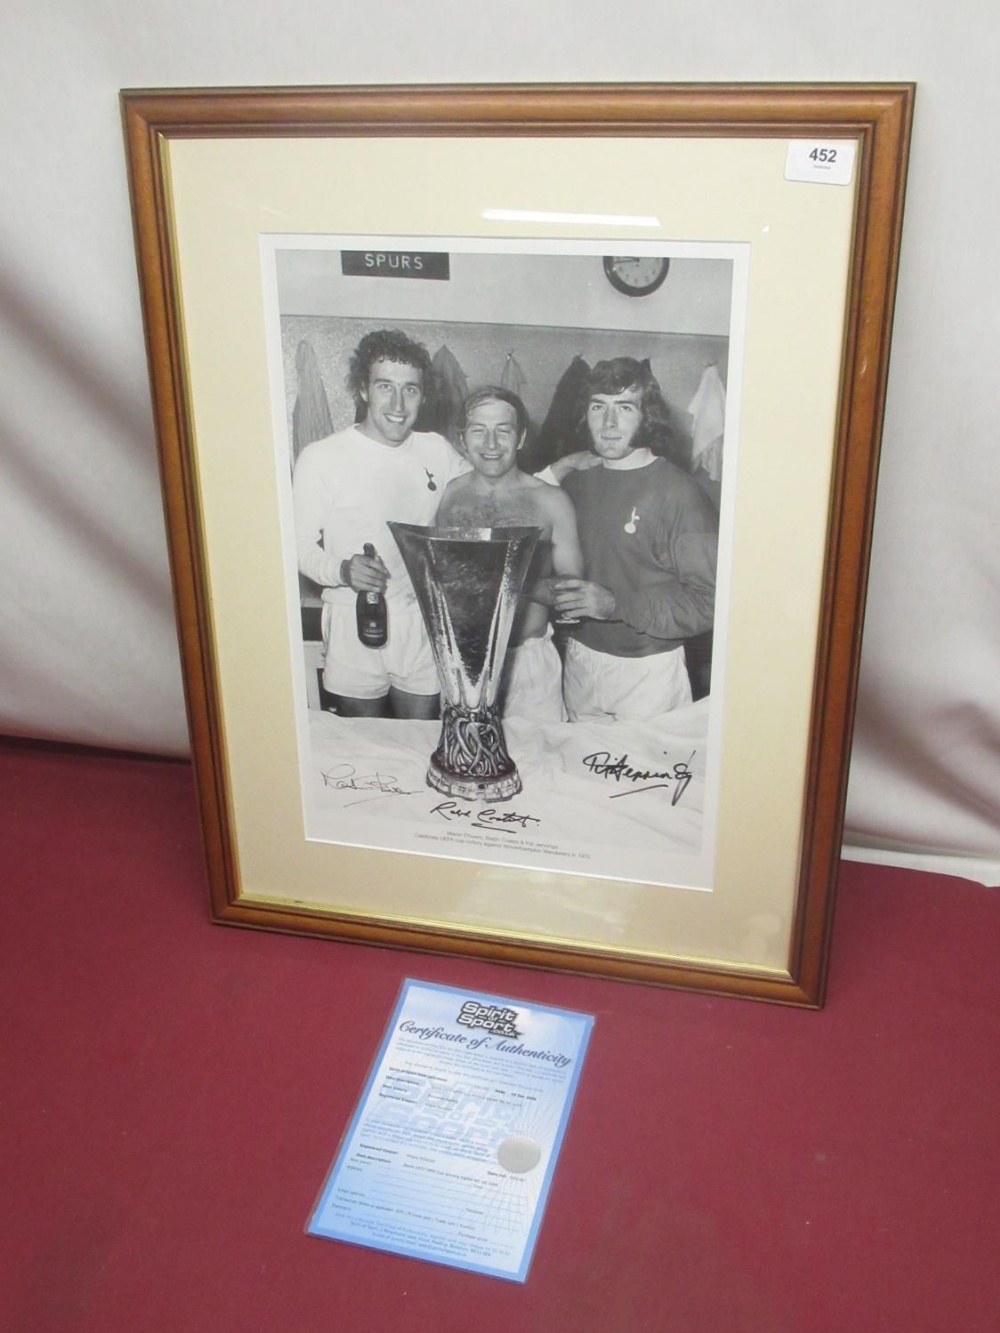 1972 UEFA Cup Winners Signed Limited Edition Print- Martin Chivers, Ralphs Coats and Pat Jenning